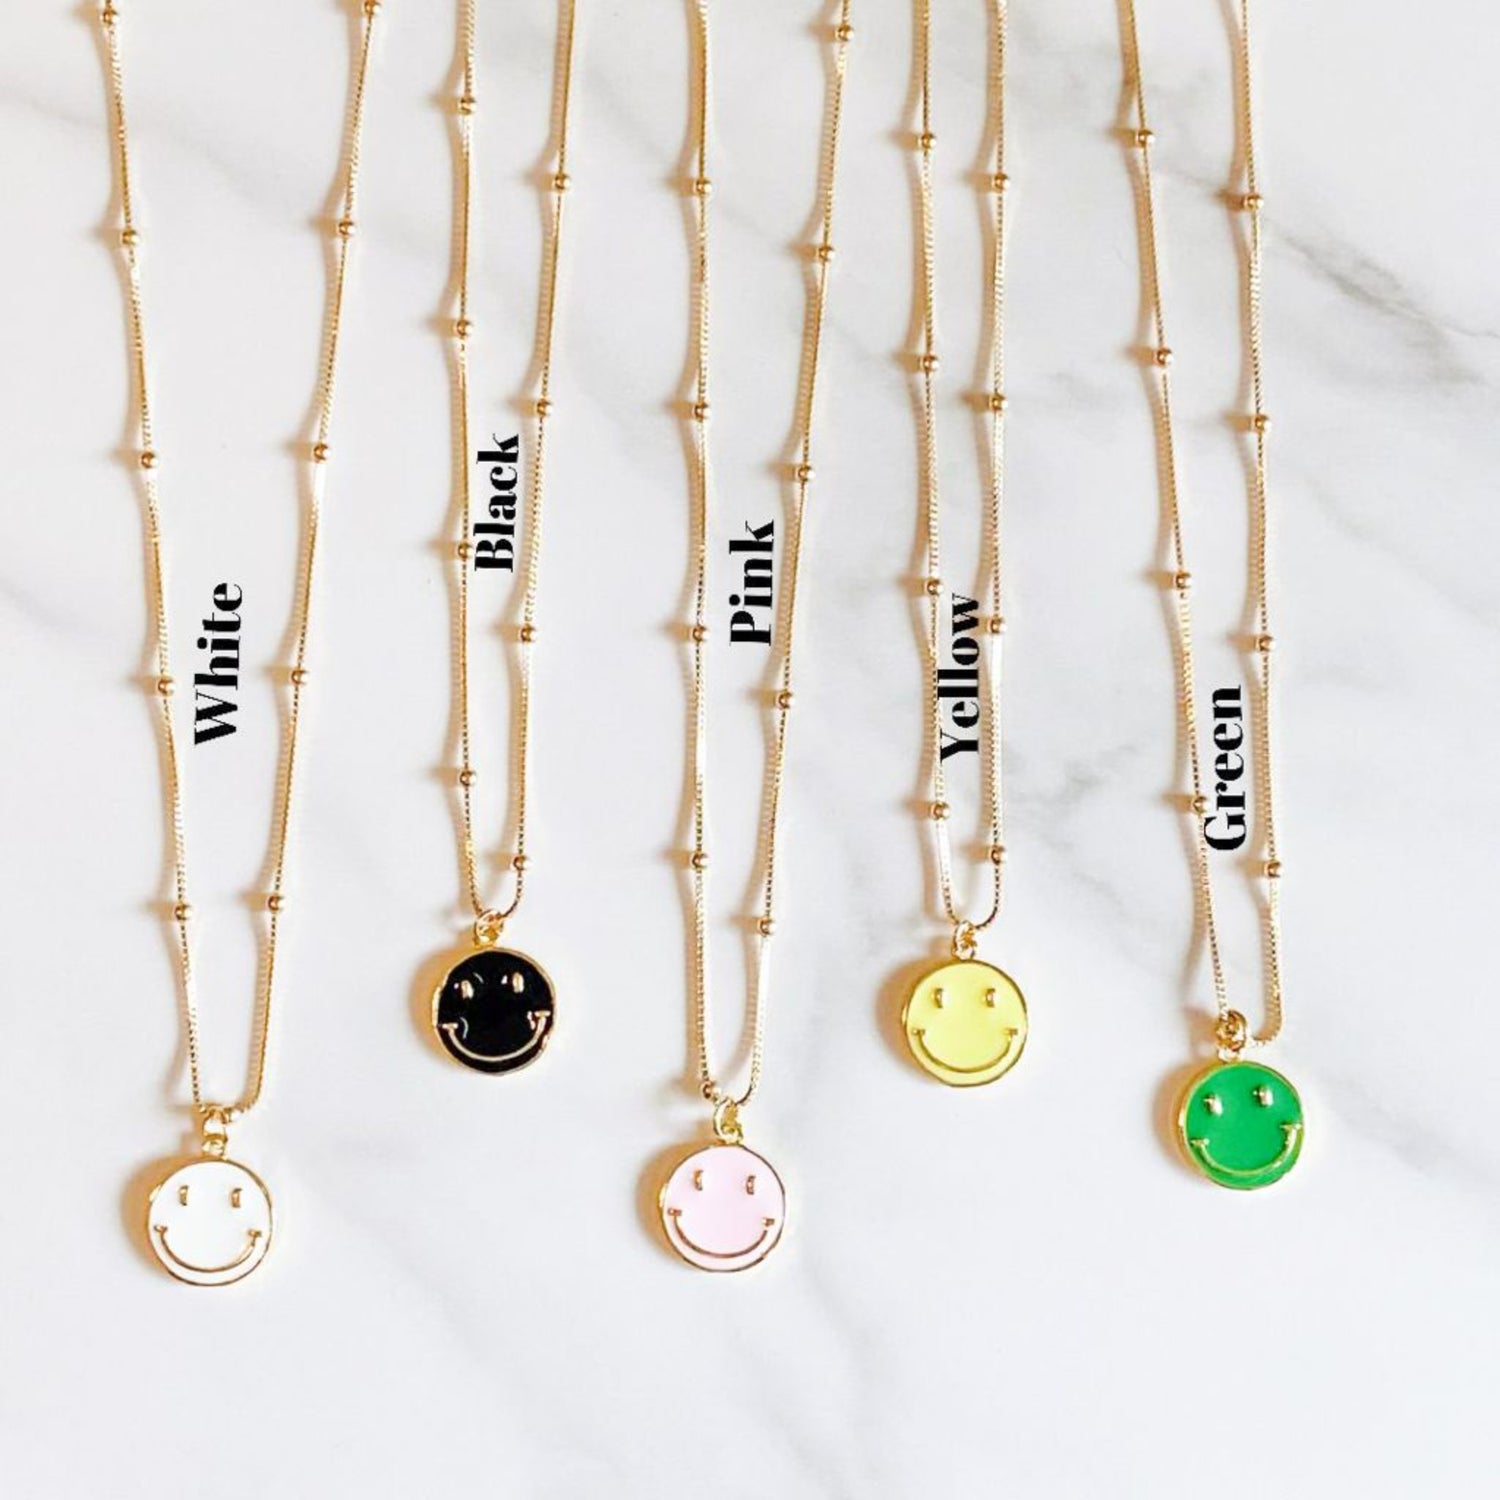 Happy necklace, gold-filled chain and an enamel pendant, available in white, black, pink, yellow, and green to be trendy and fashion by ISVI Boutique, Miami